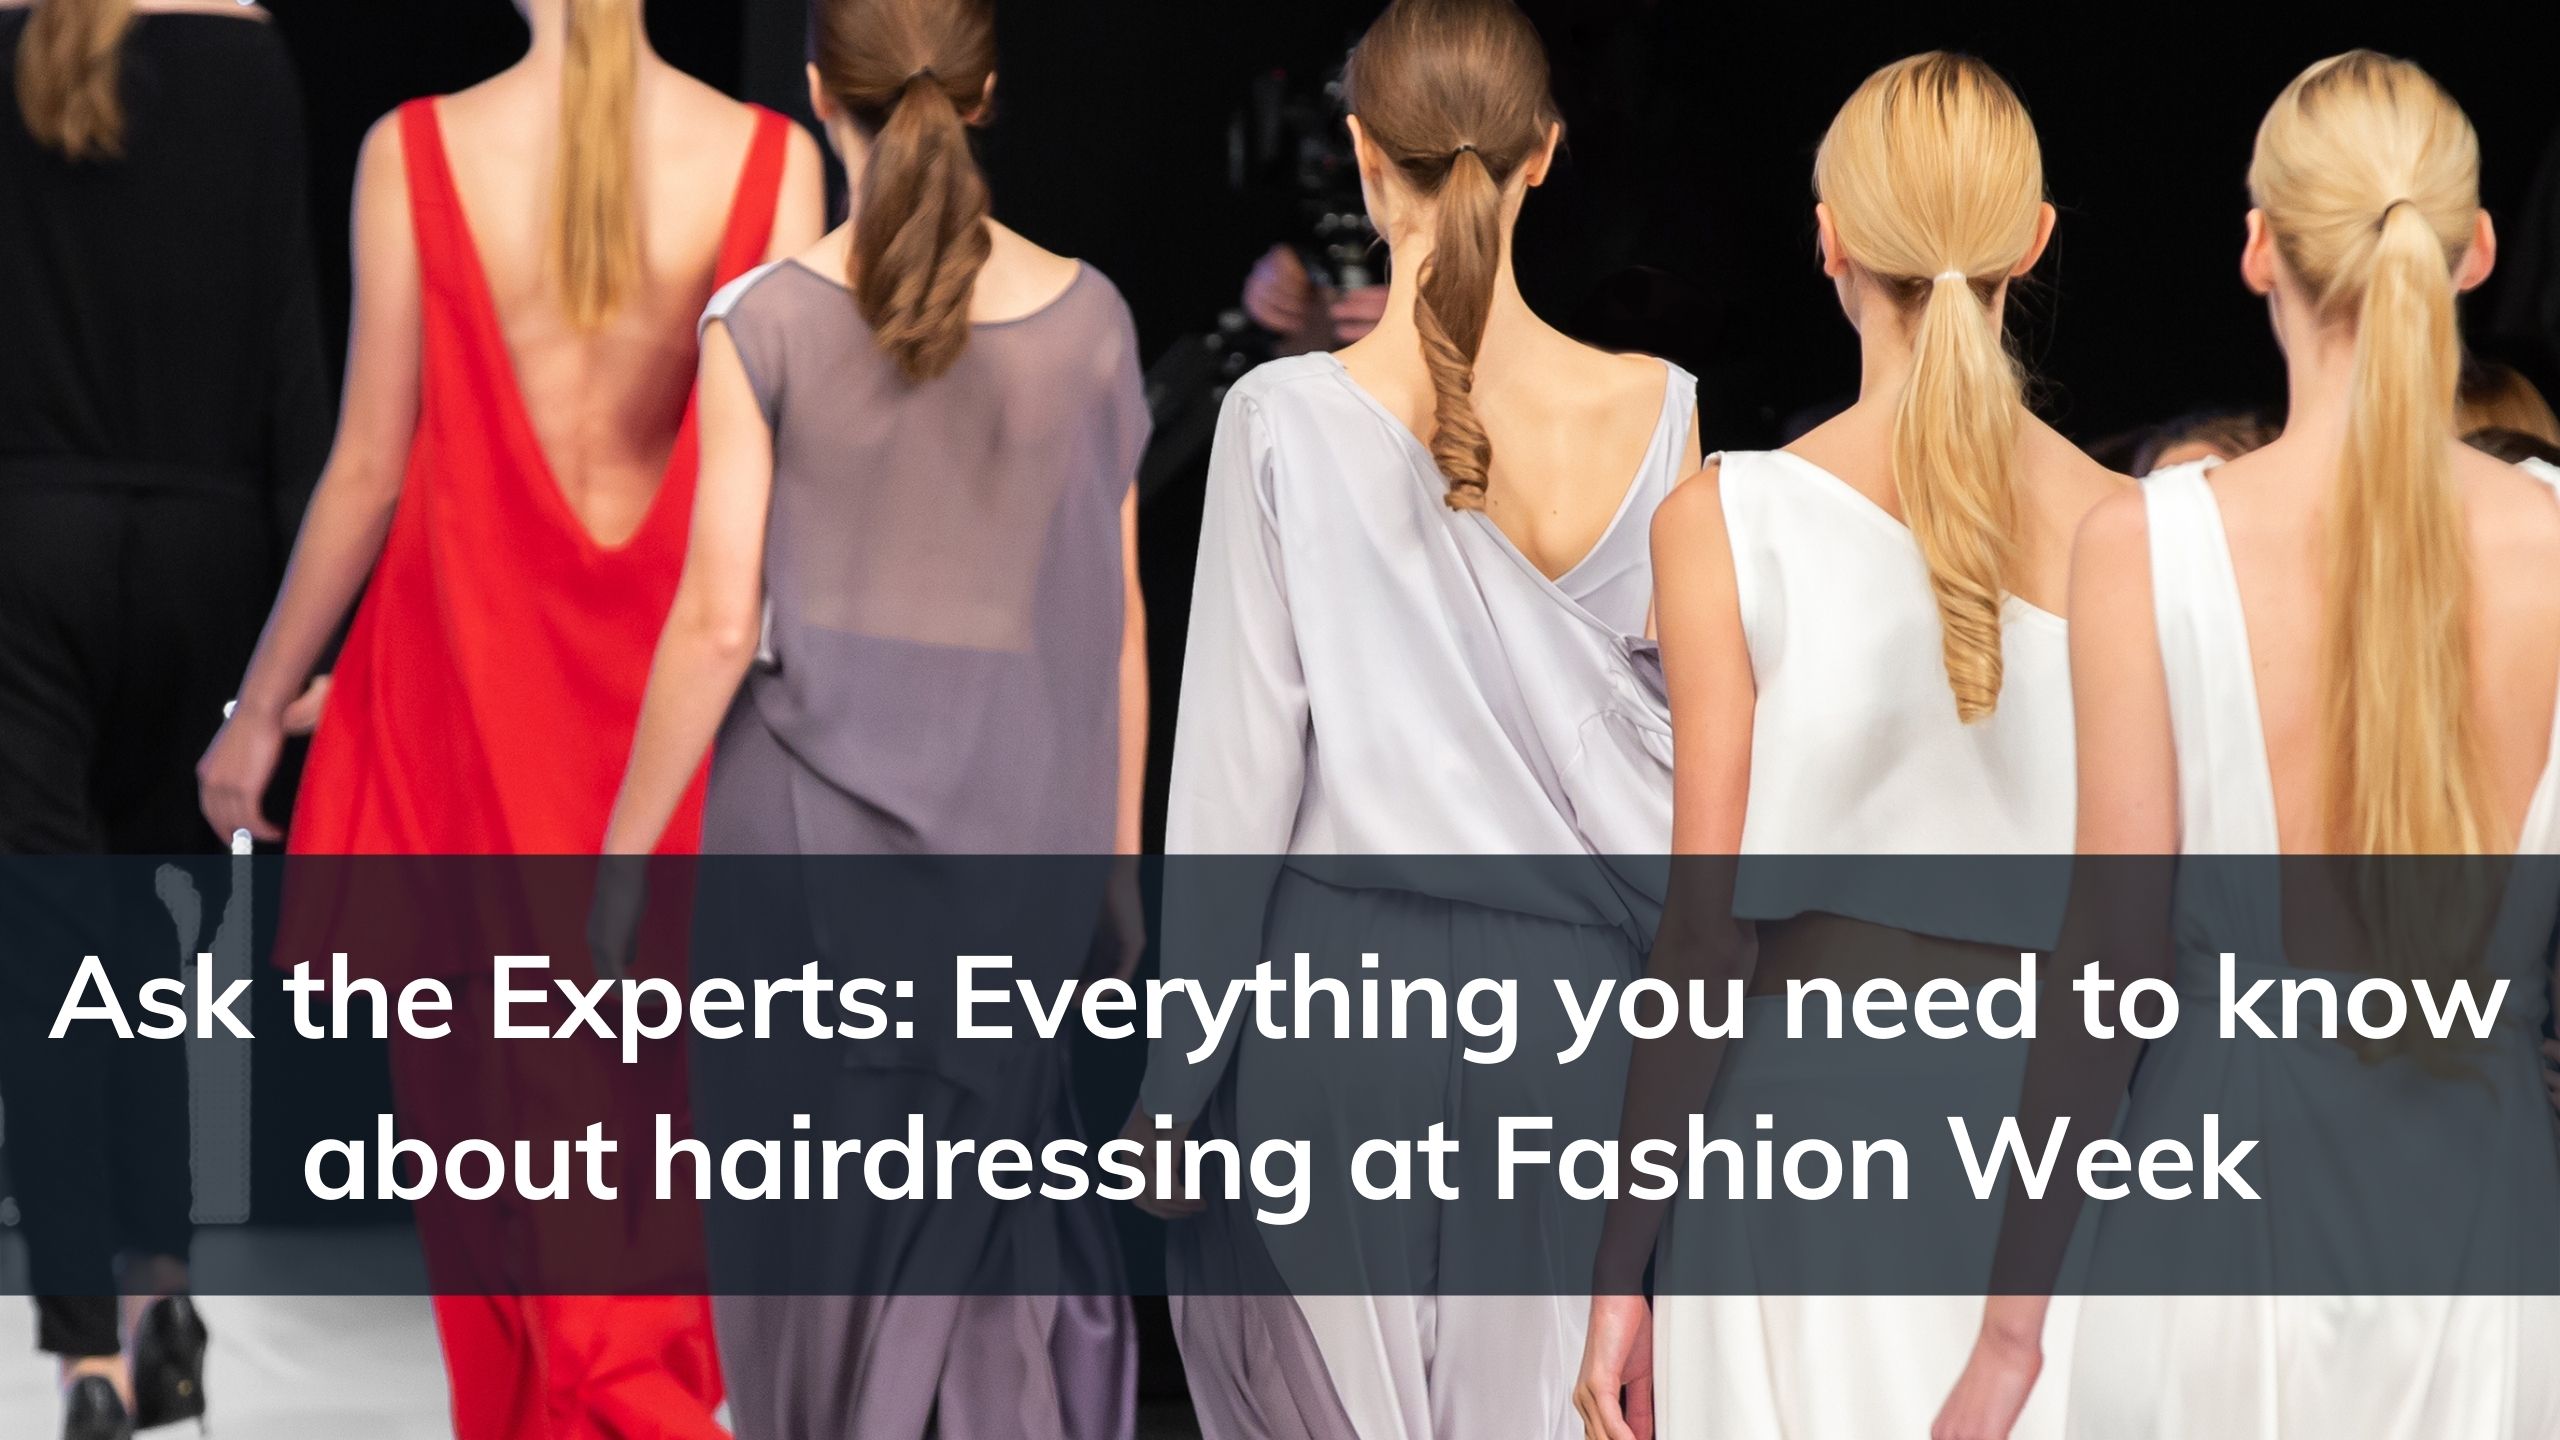 Hairdressing at fashion week: Everything you need to know - VTCT